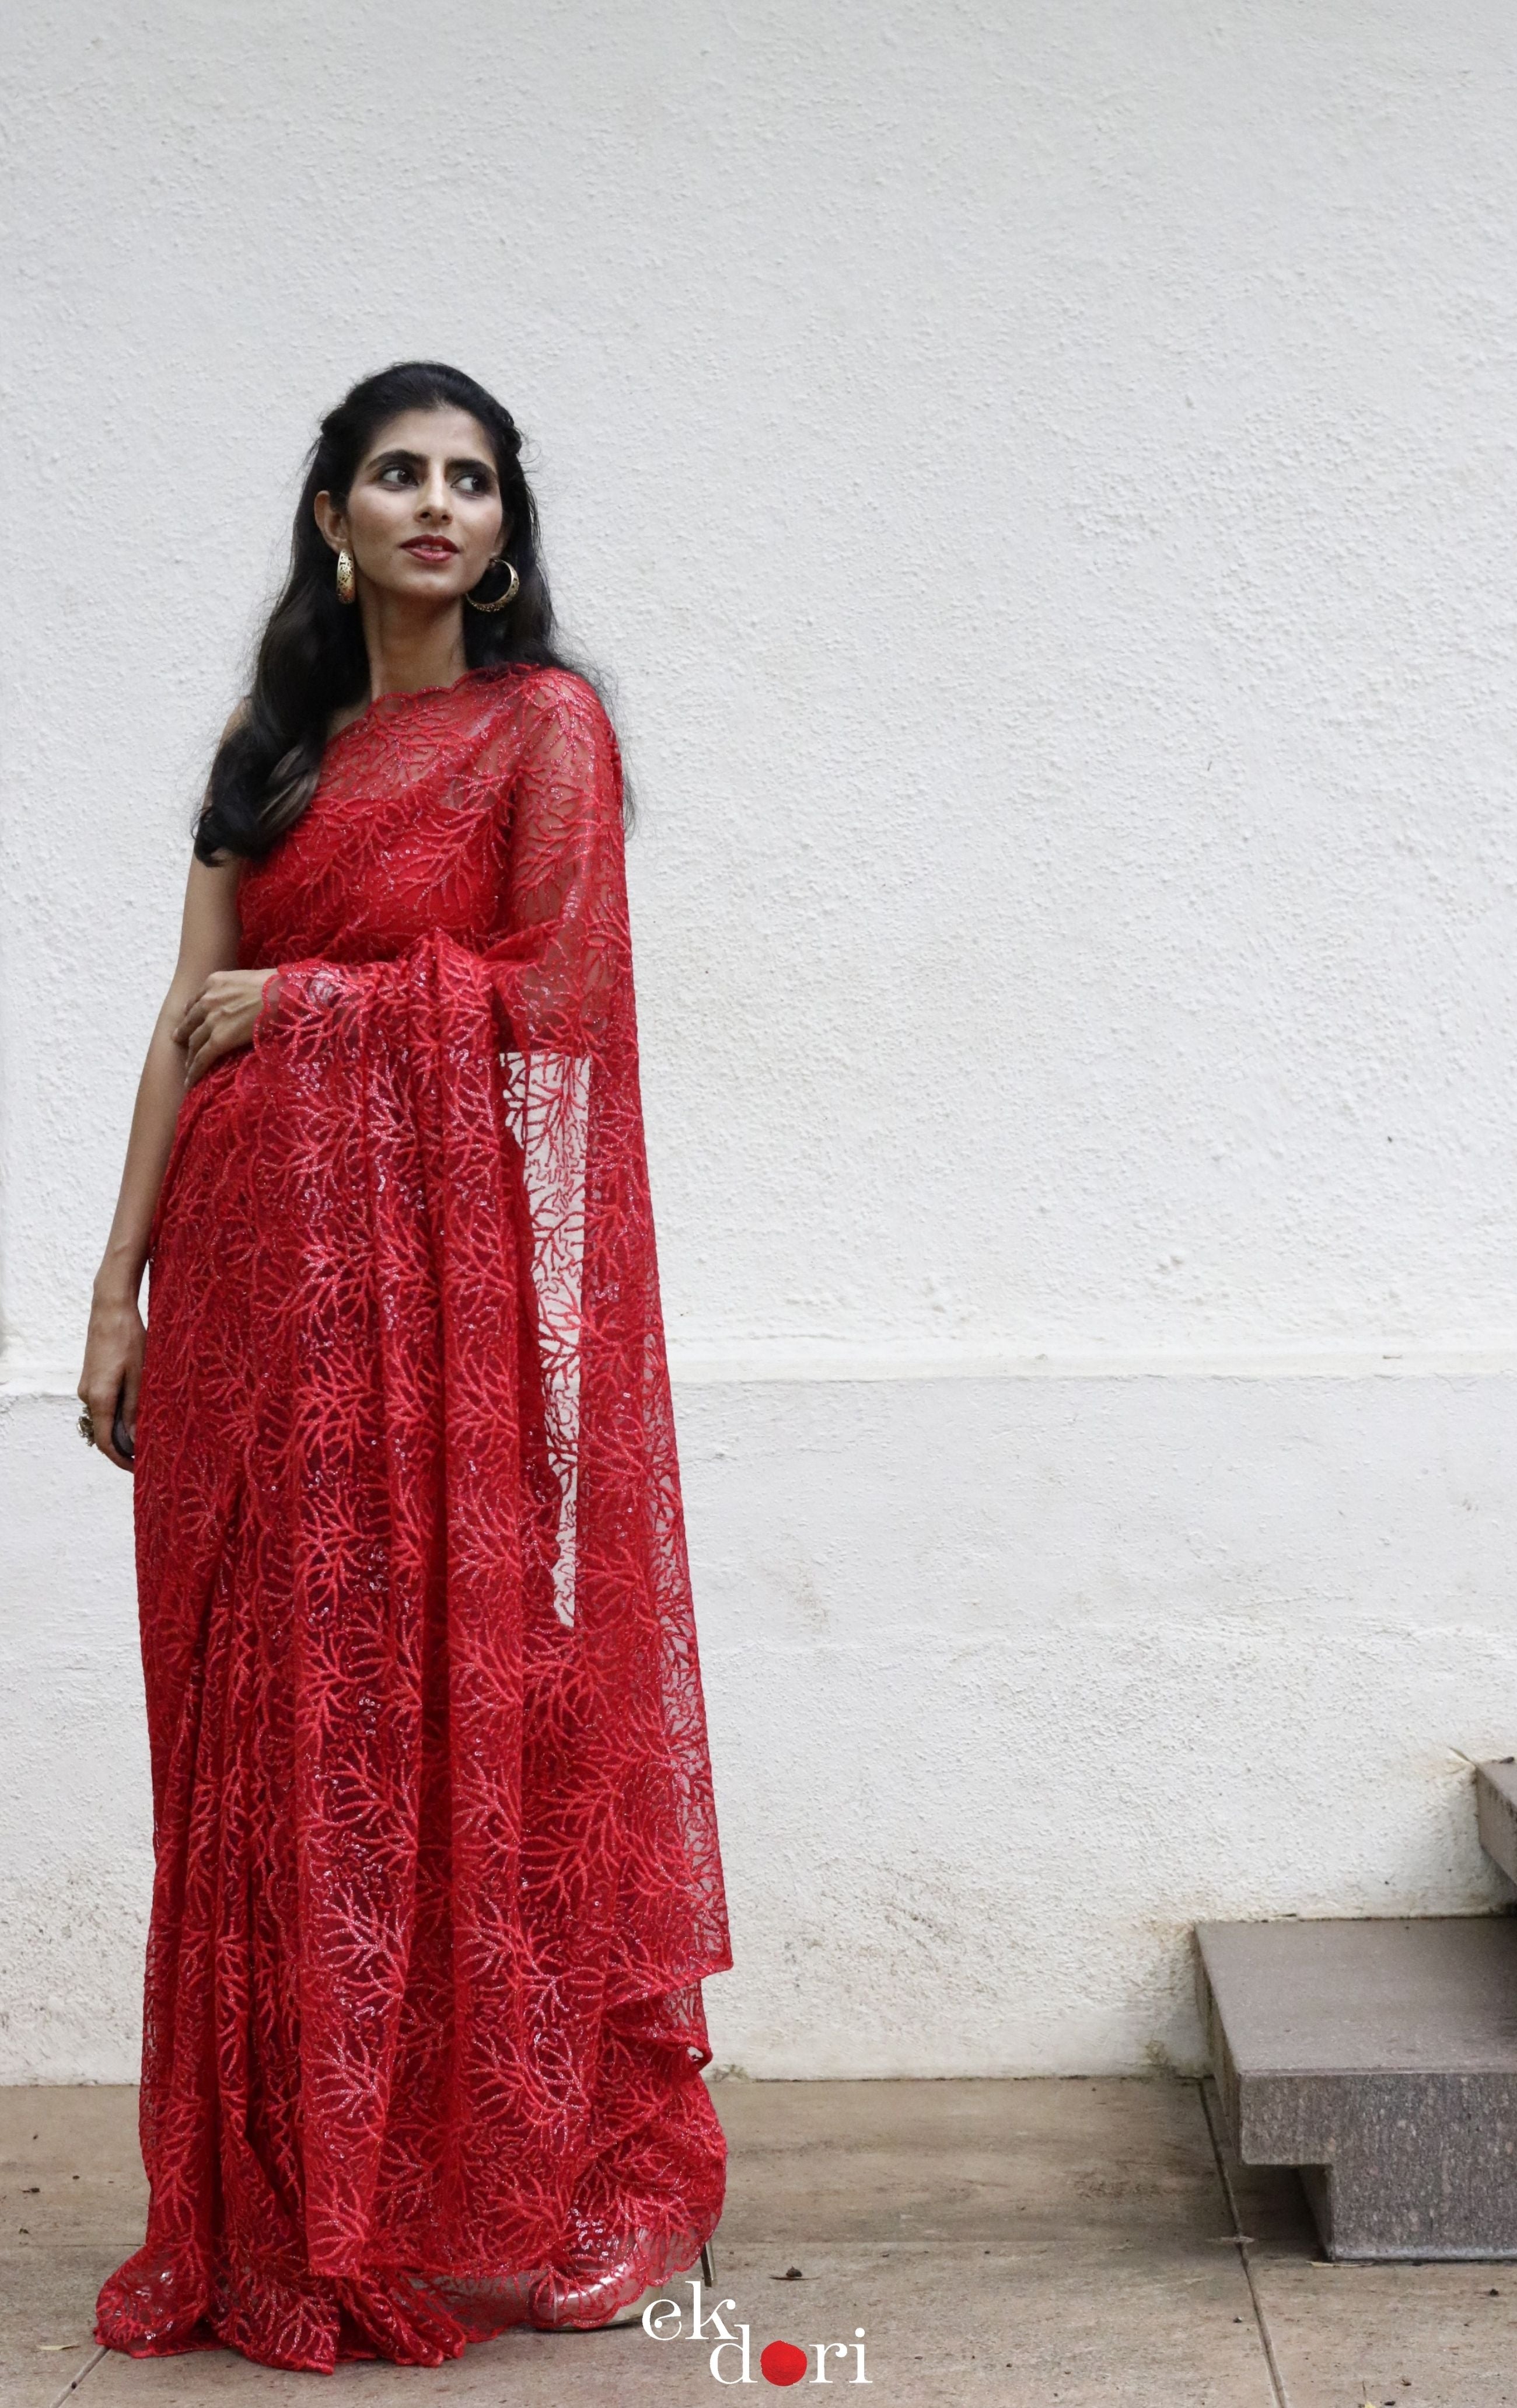 Discover more than 204 red saree images